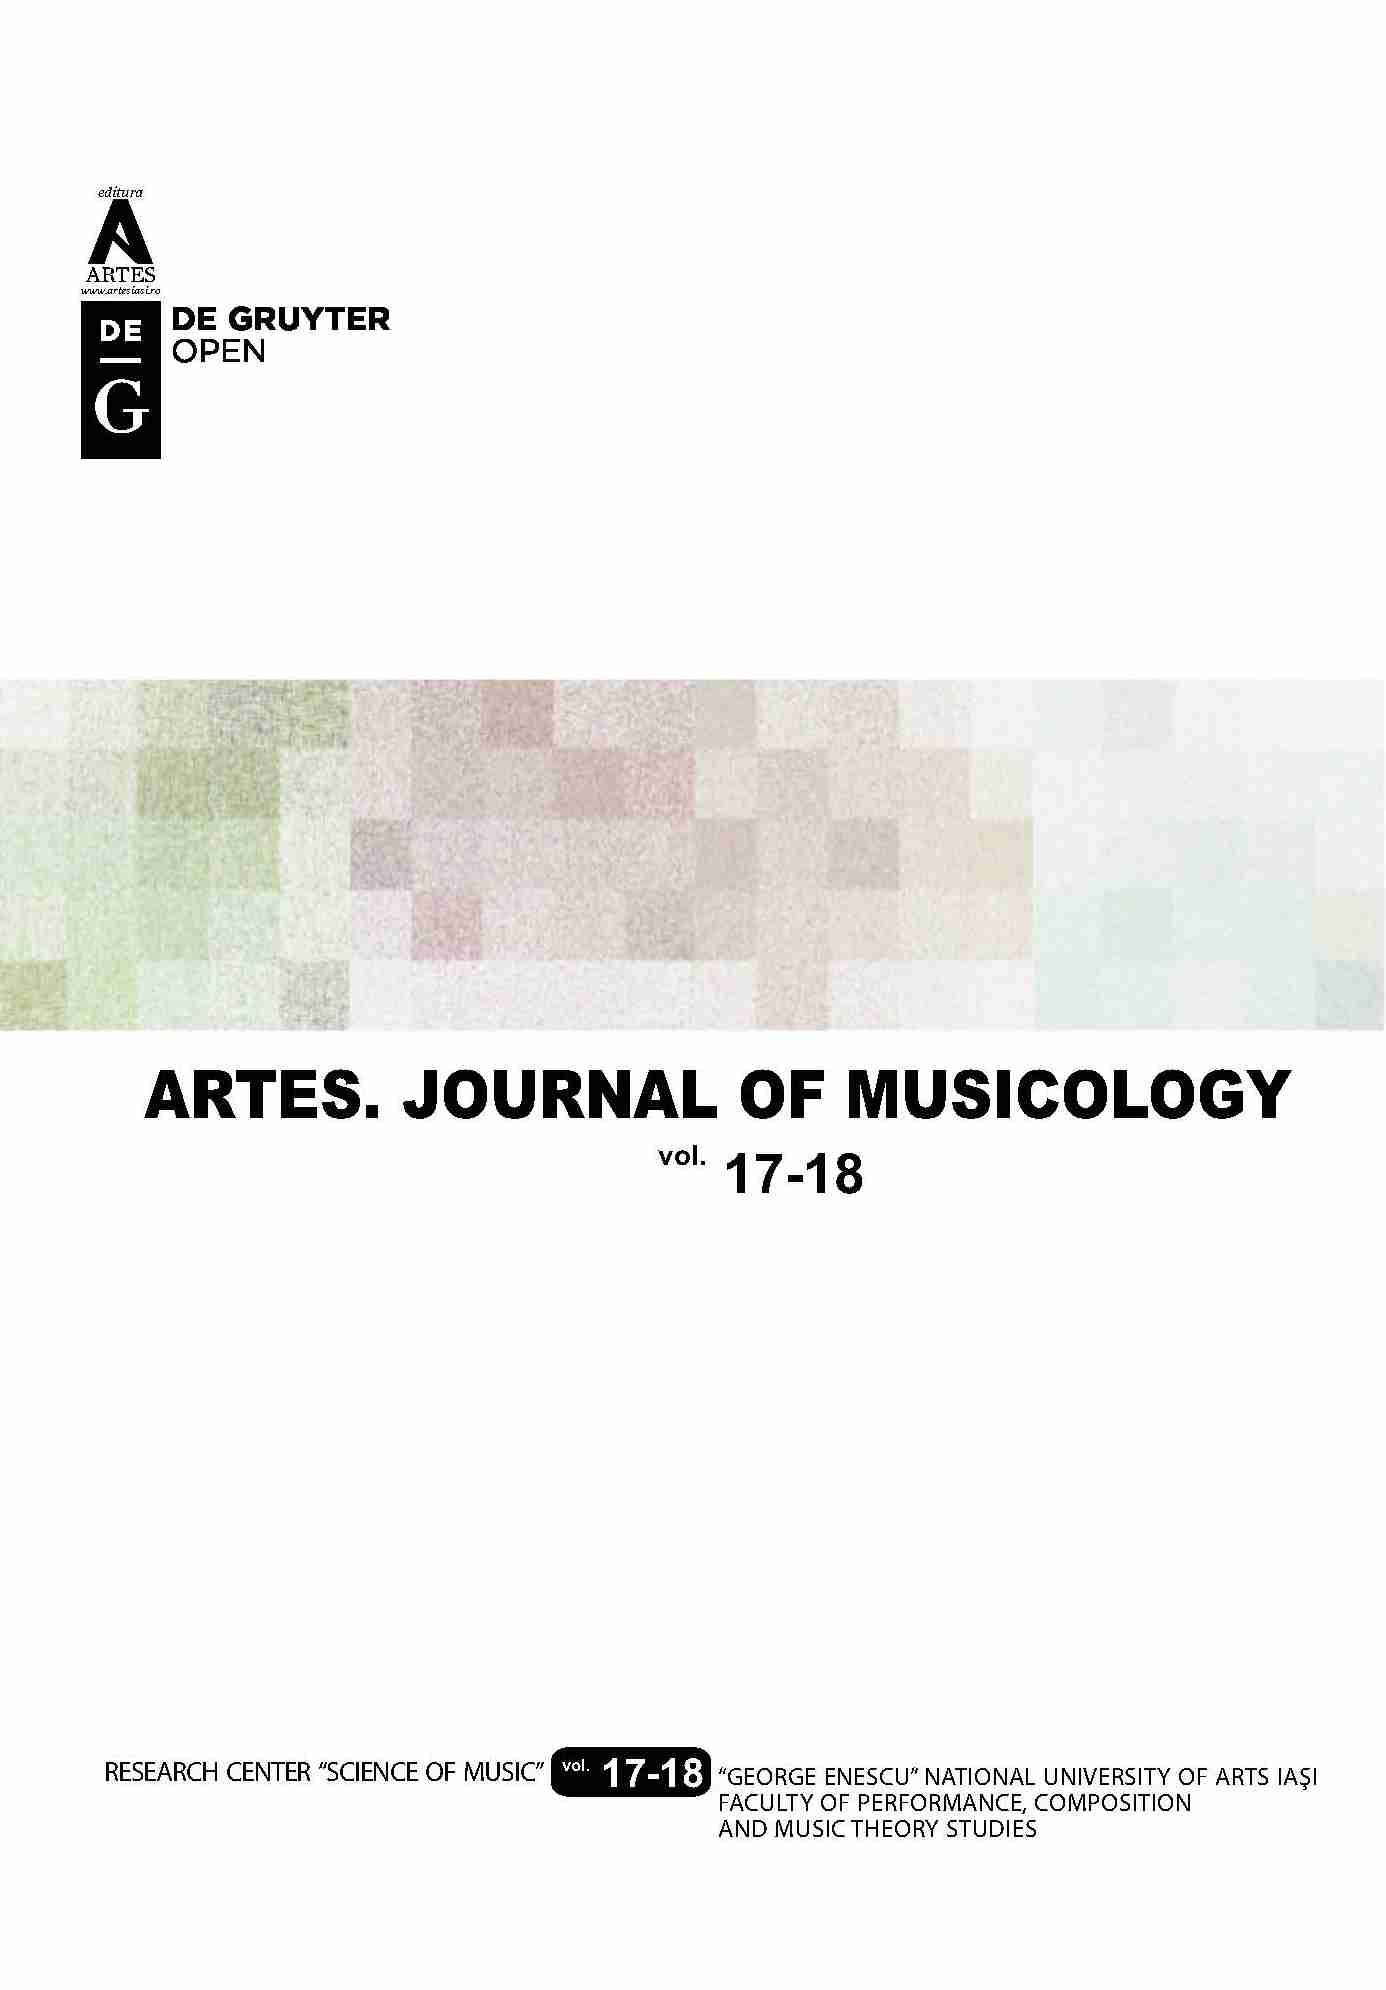 Interpretative and Compositional Connotations 
from a Musicological Perspective Cover Image